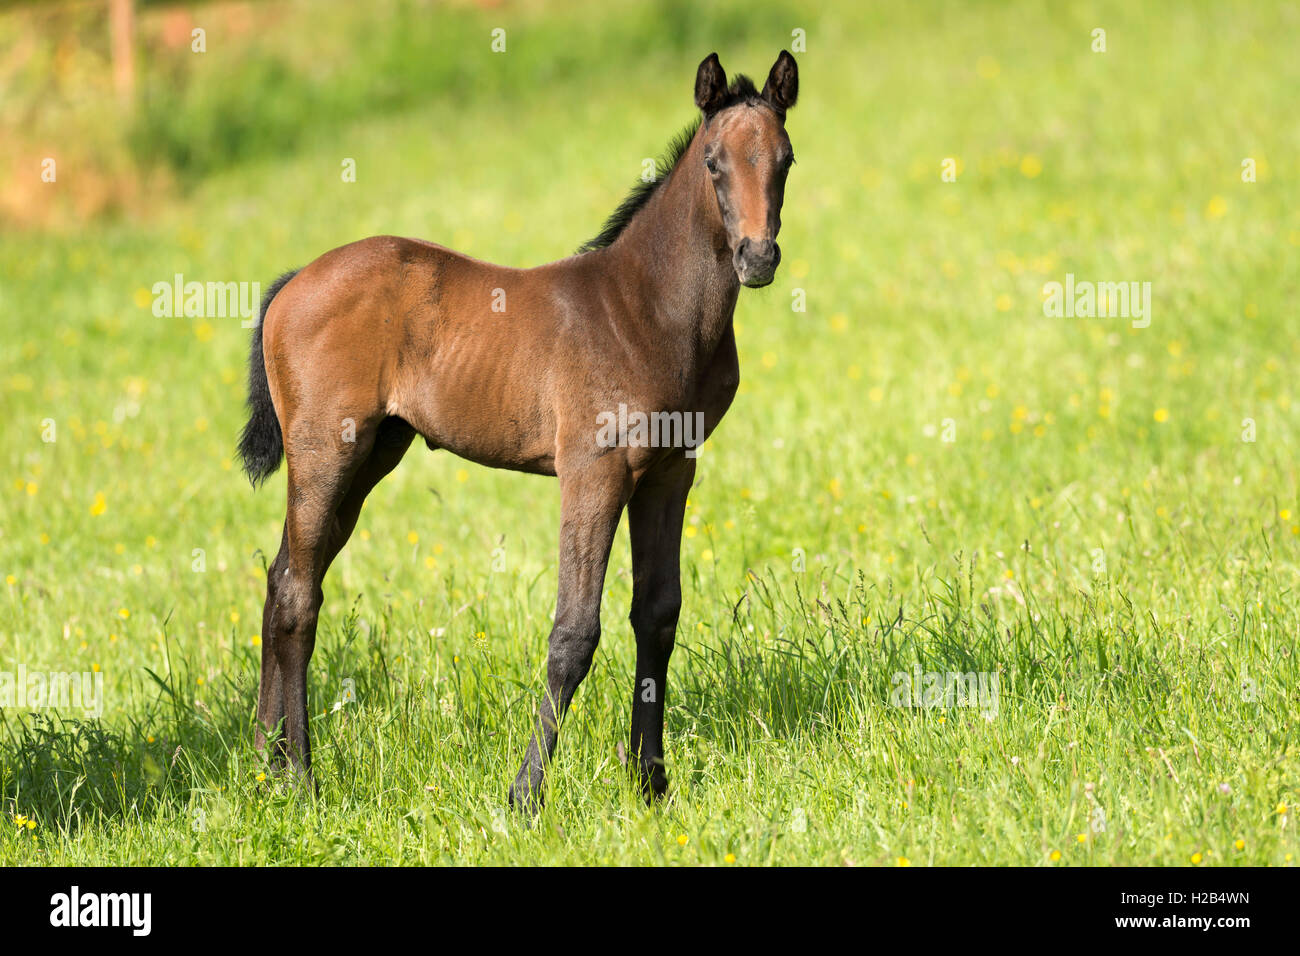 Thoroughbred horse, racehorse, foal standing in meadow, Baden-Württemberg, Germany Stock Photo